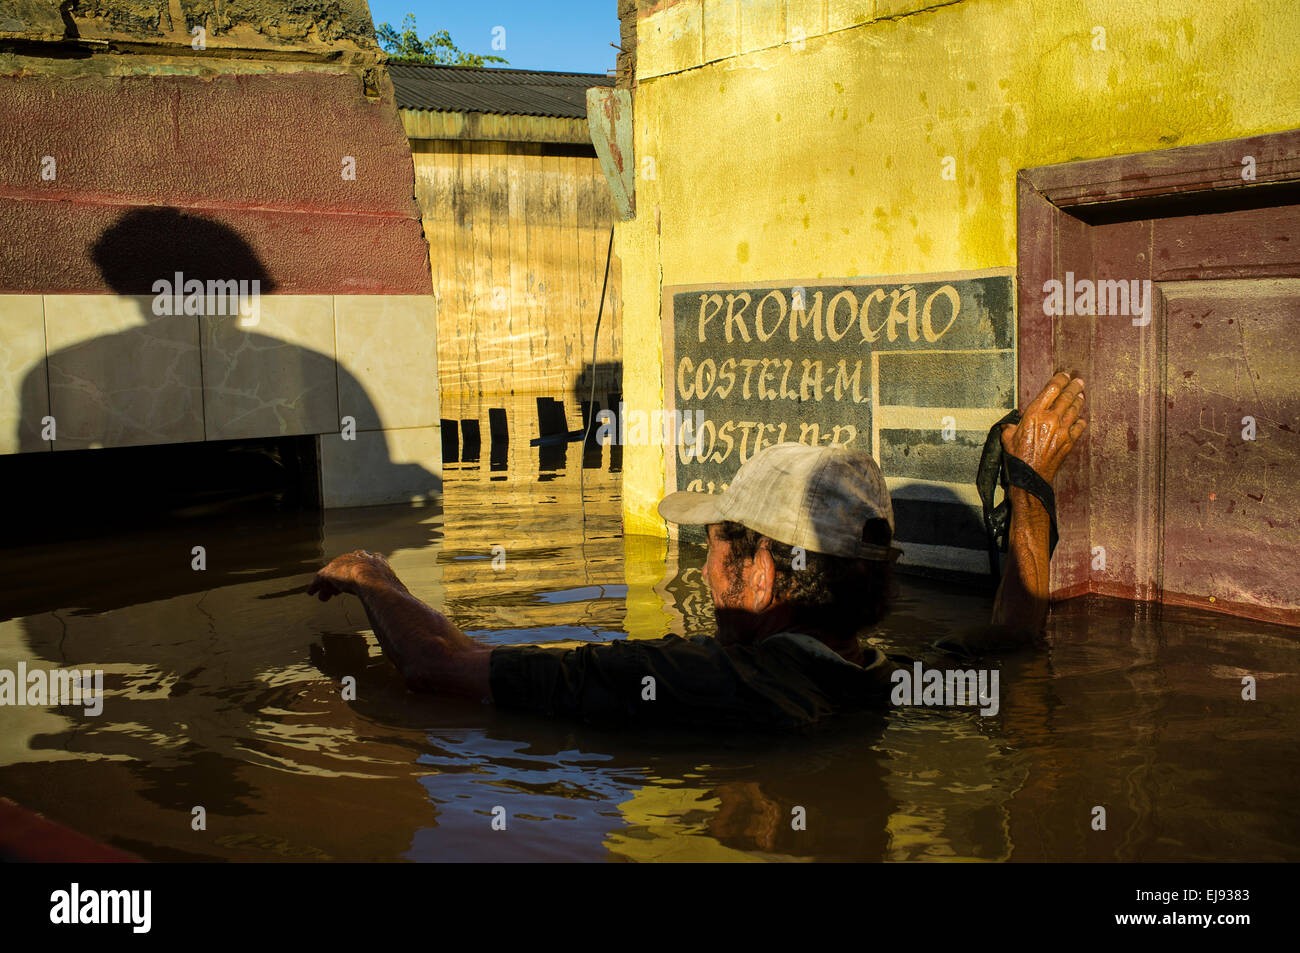 2015 flooding in Brazilian Amazon. Joao Pereira de Araujo tries to check flood line inside his house at Triangulo Novo district, Rio Branco city, Acre State. Floods have been affecting thousands of people in the state of Acre, northern Brazil, since 23 February 2015, when some of the state’s rivers, in particular the Acre river, overflowed. Further heavy rainfall has forced river levels higher still, and on 03 March 2015 Brazil’s federal government declared a state of emergency in Acre State, where current flood situation has been described as the worst in 132 years. Stock Photo